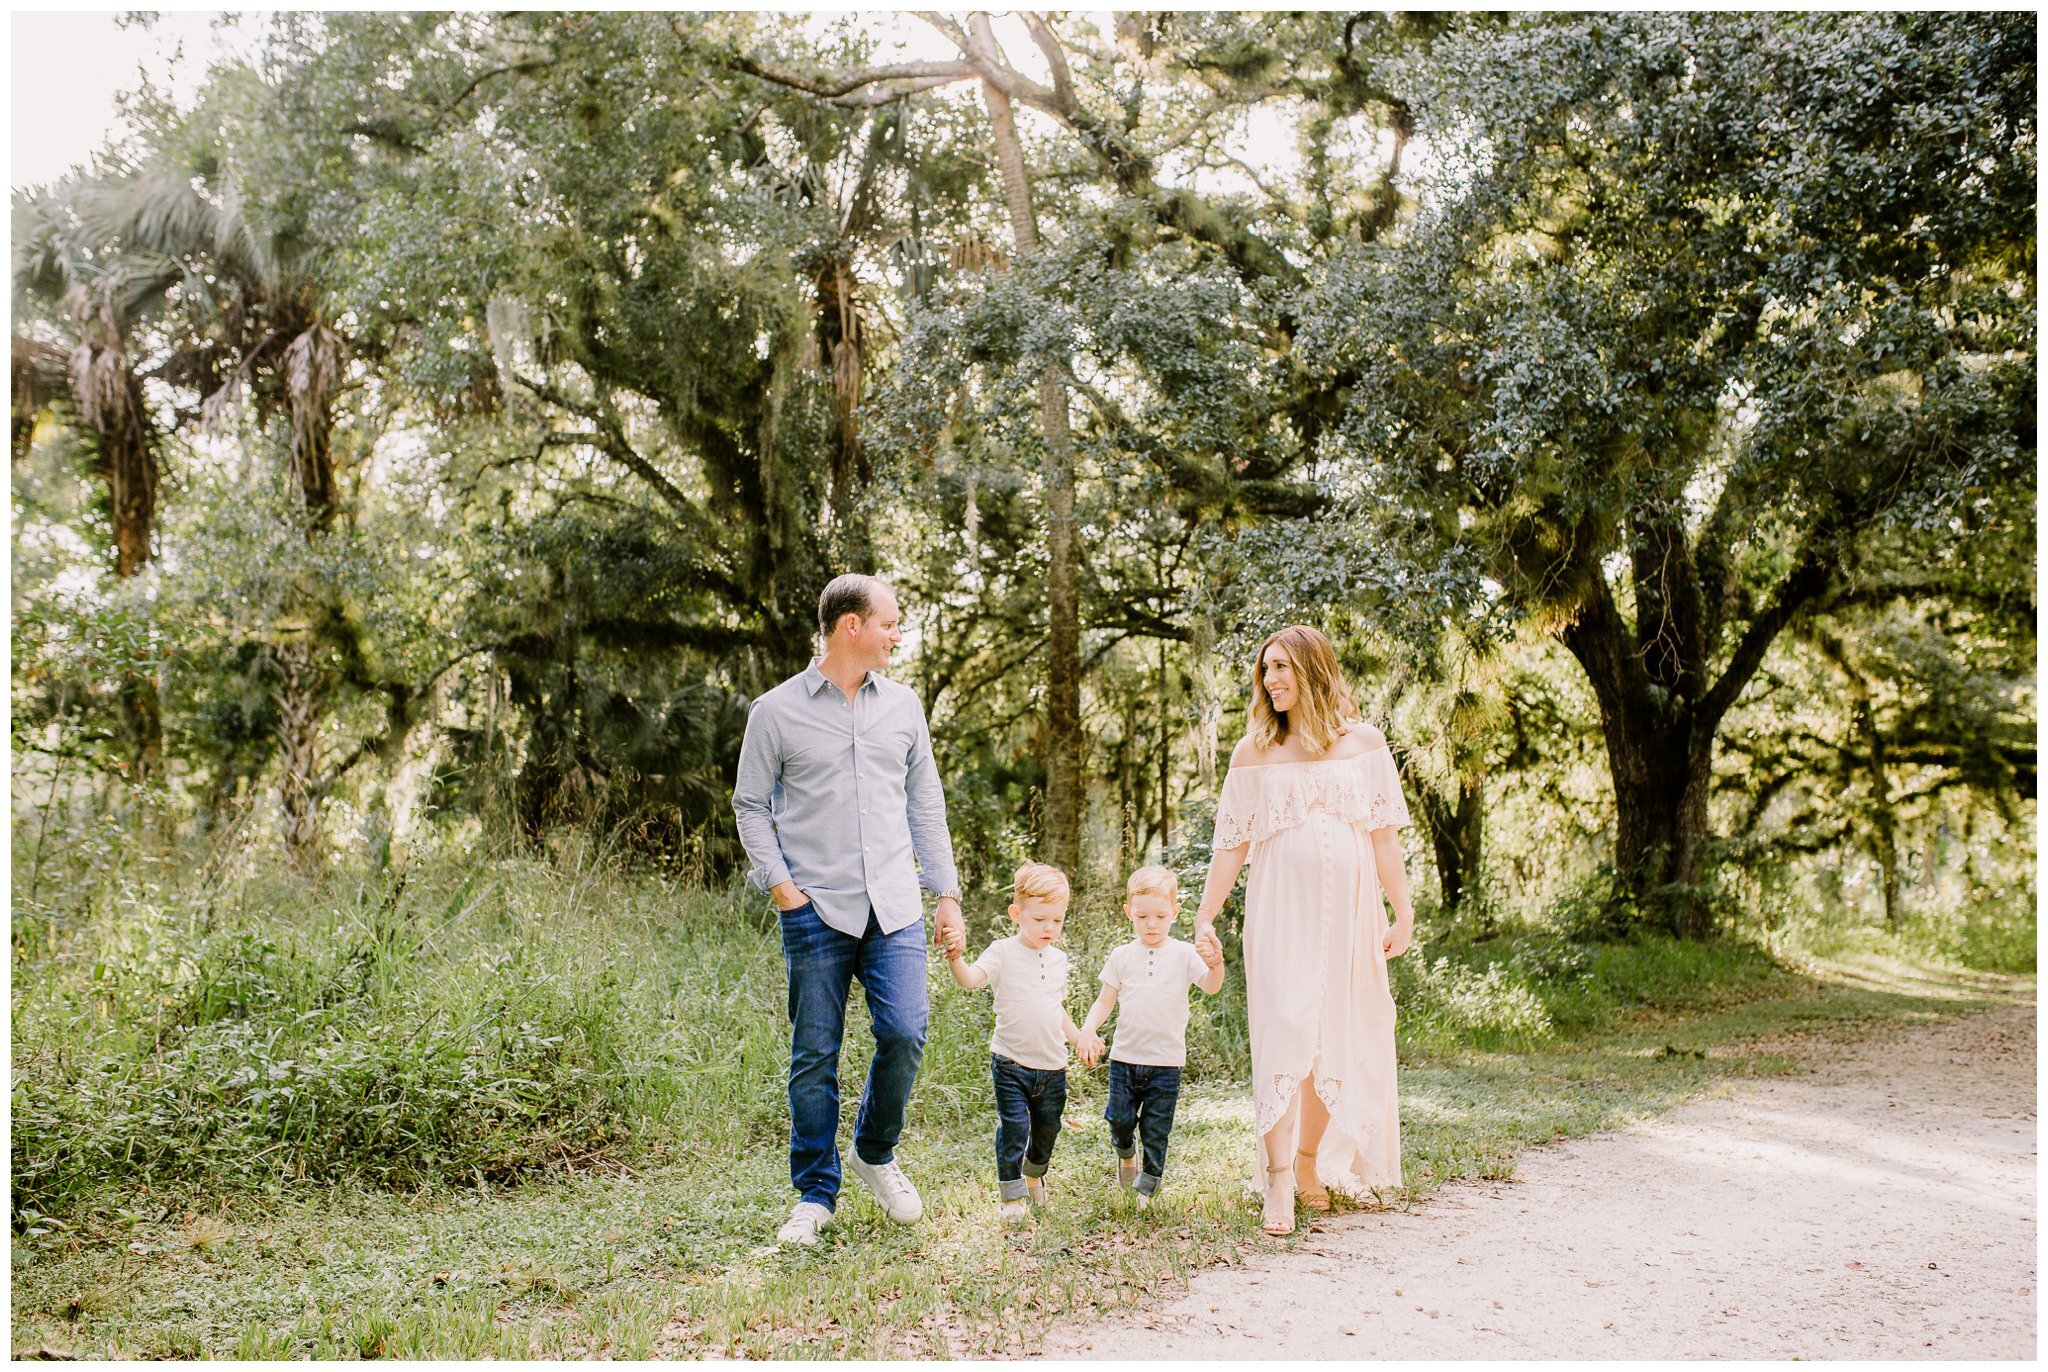 kimberly smith photography- south florida family photographers- south florida family photographer- family nature photo session- river bend park family photos | jupiter fl family photographers_0212.jpg